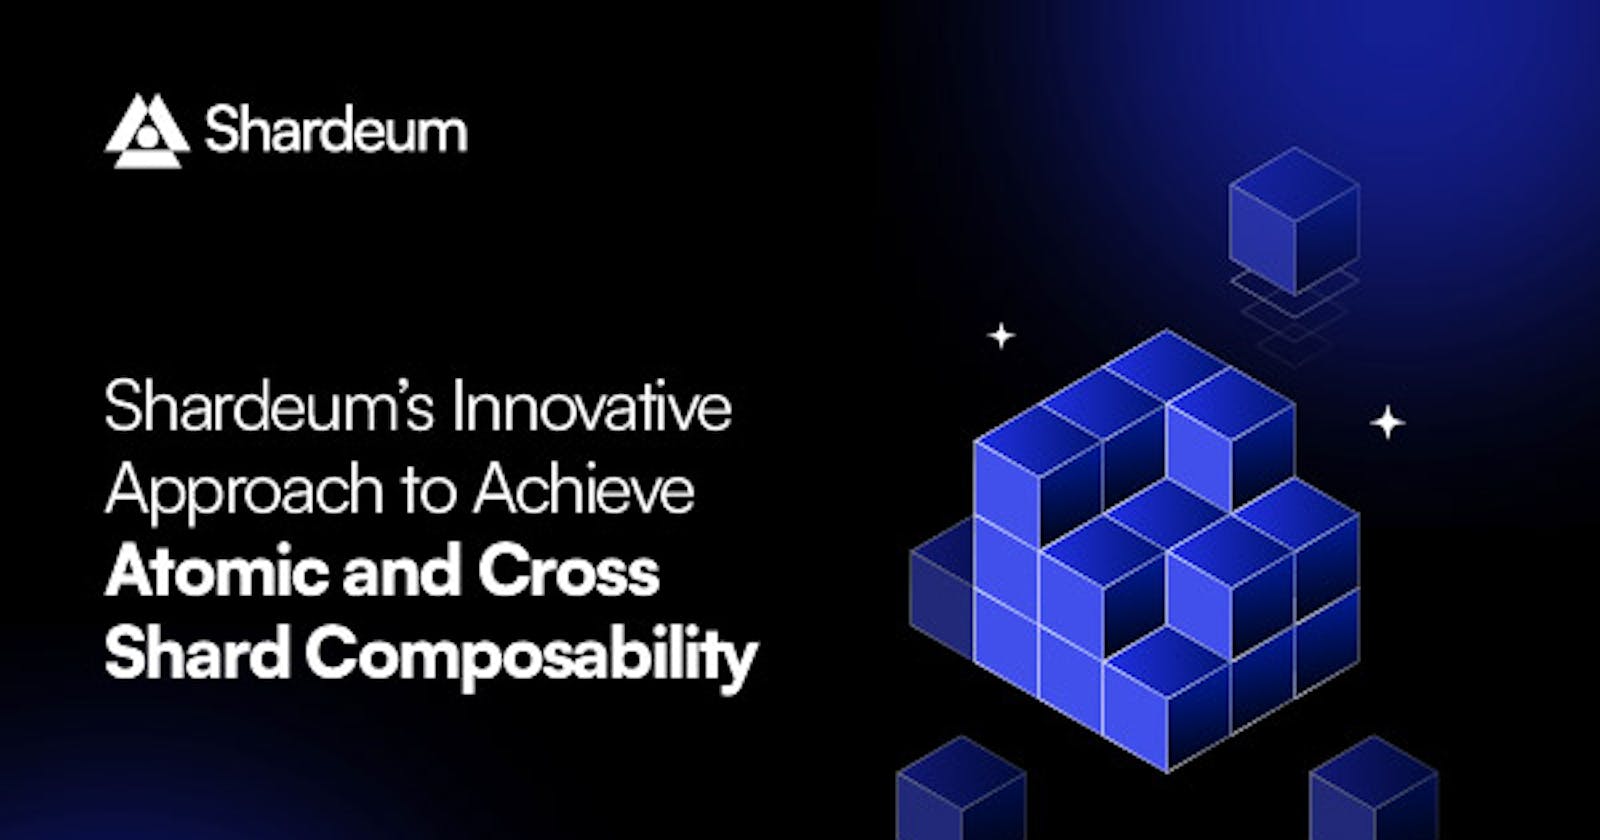 Shardeum’s Innovative Approach to Achieve Atomic and Cross Shard Composability